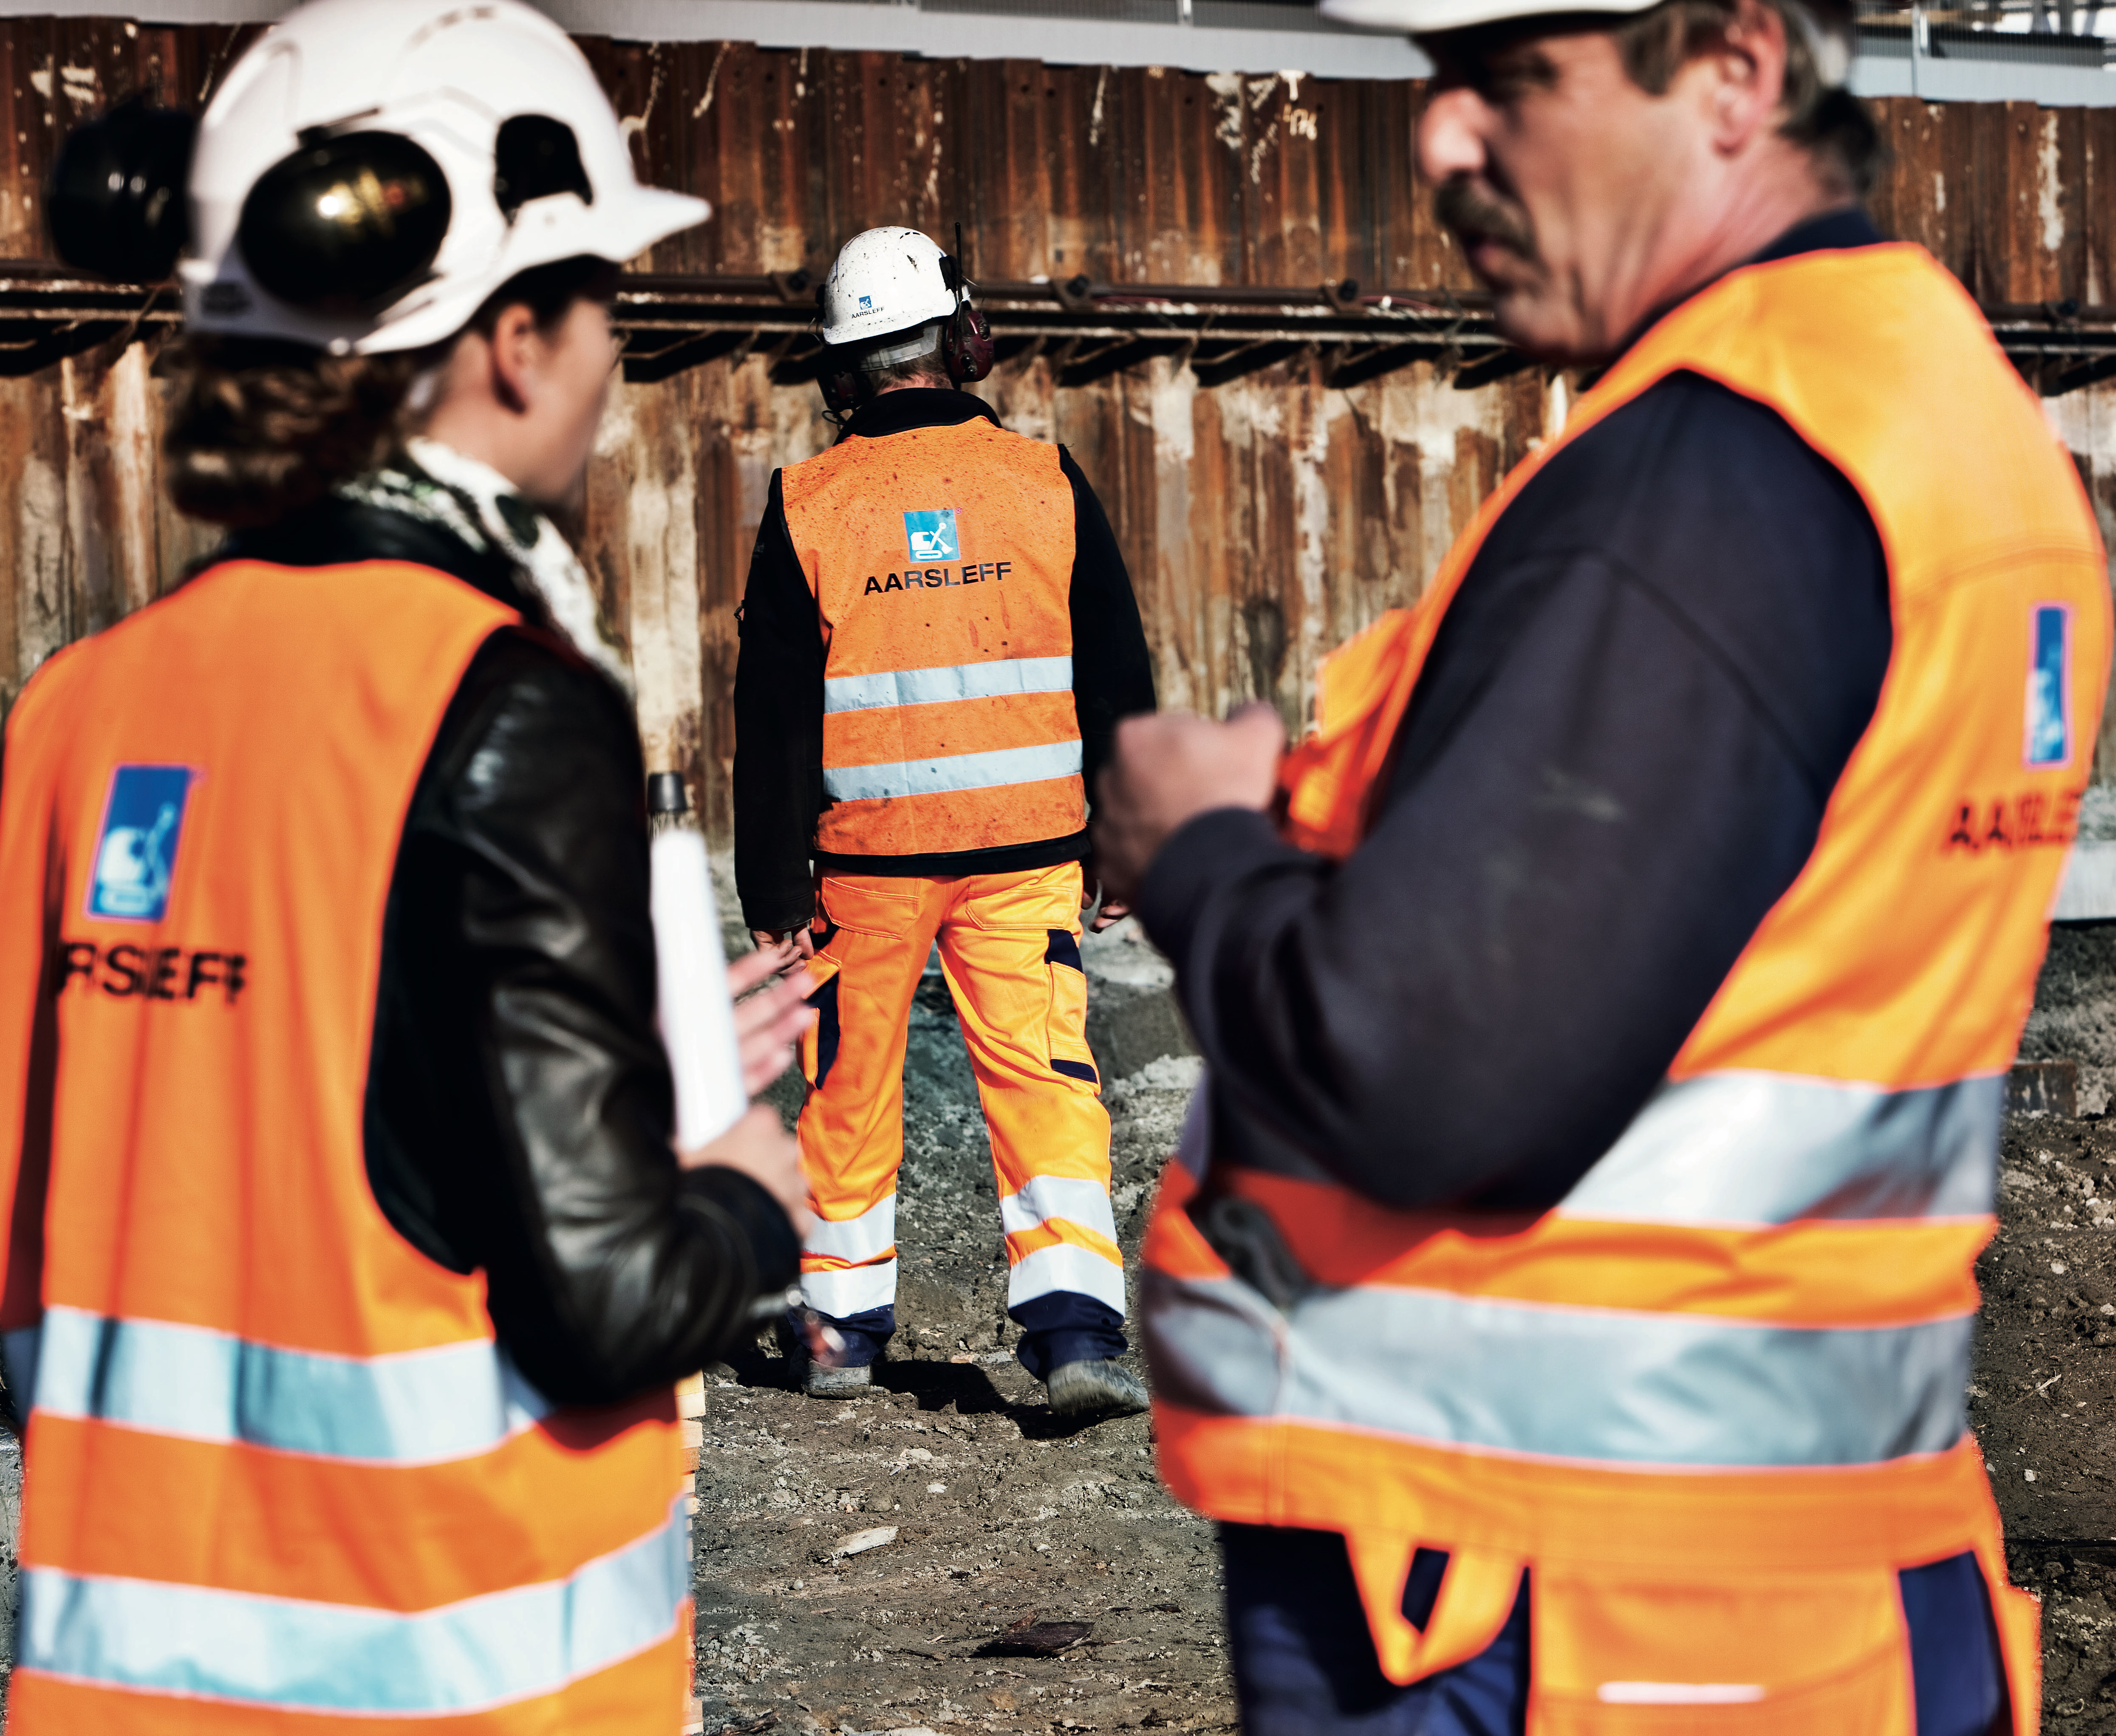 Employees at Aarsleff on the construction site